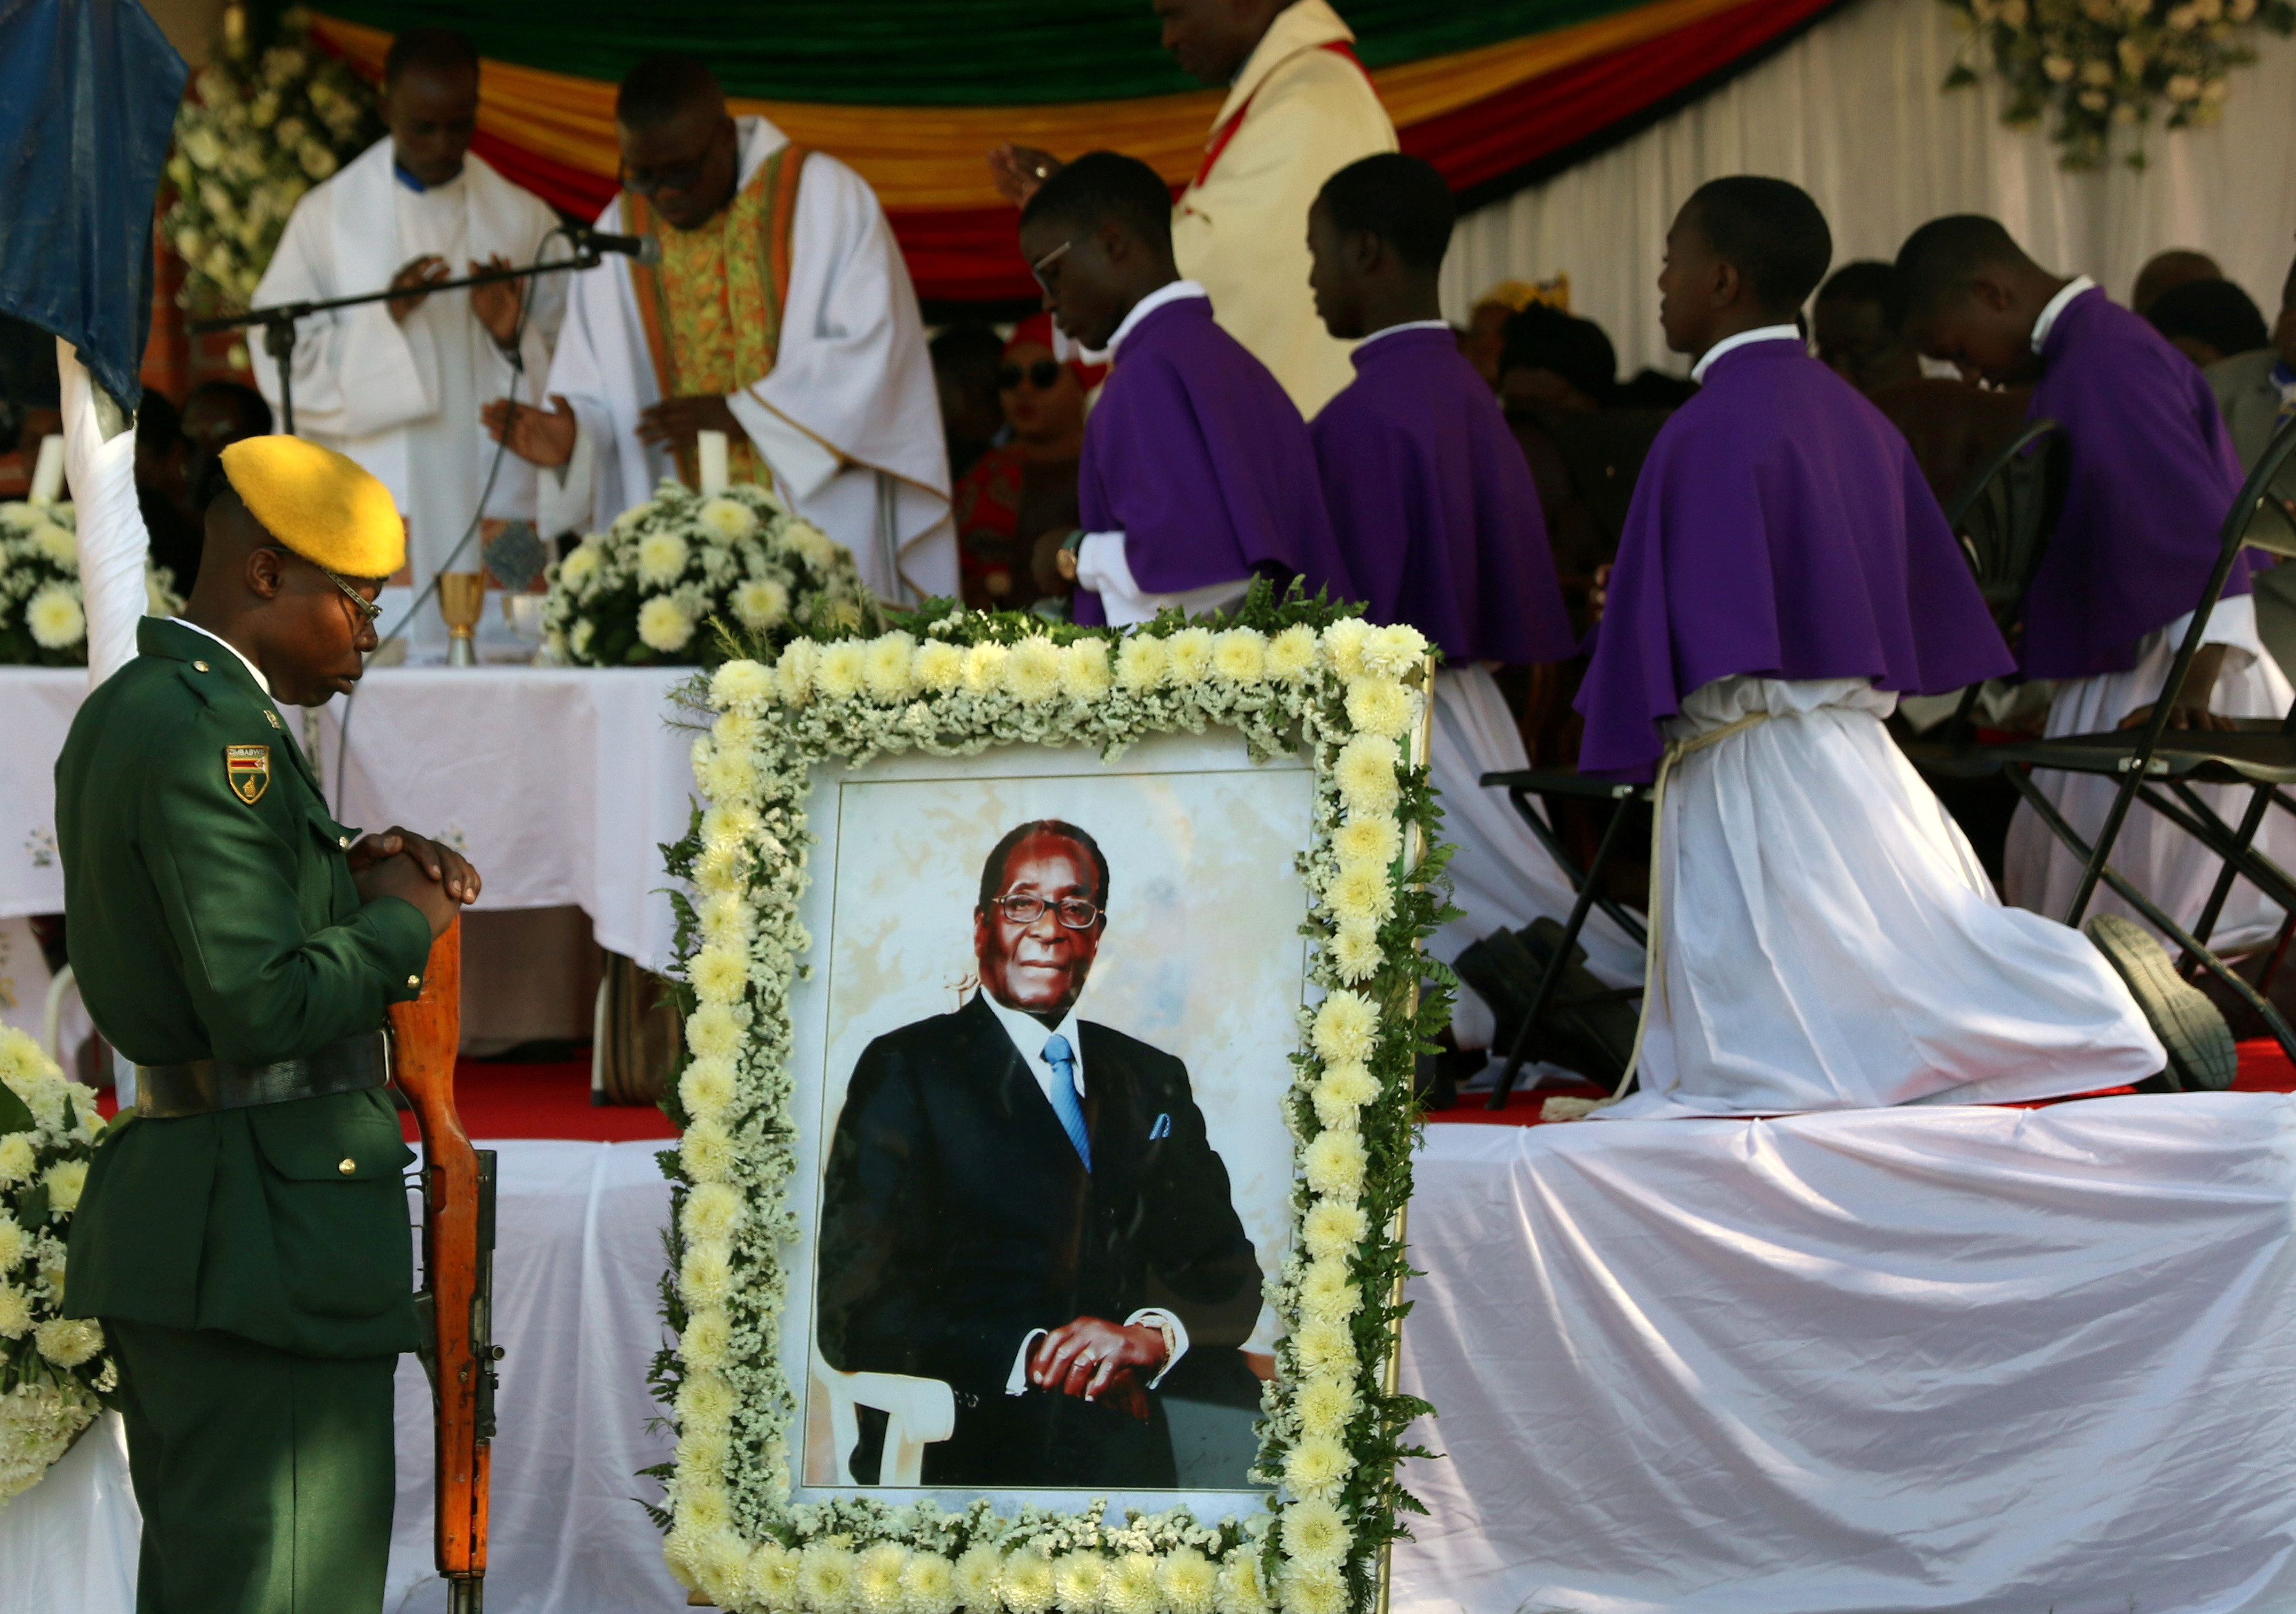 Soldiers stand beside a picture of former Zimbabwean President Robert Mugabe during a church service before his burial at his rural village in Kutama